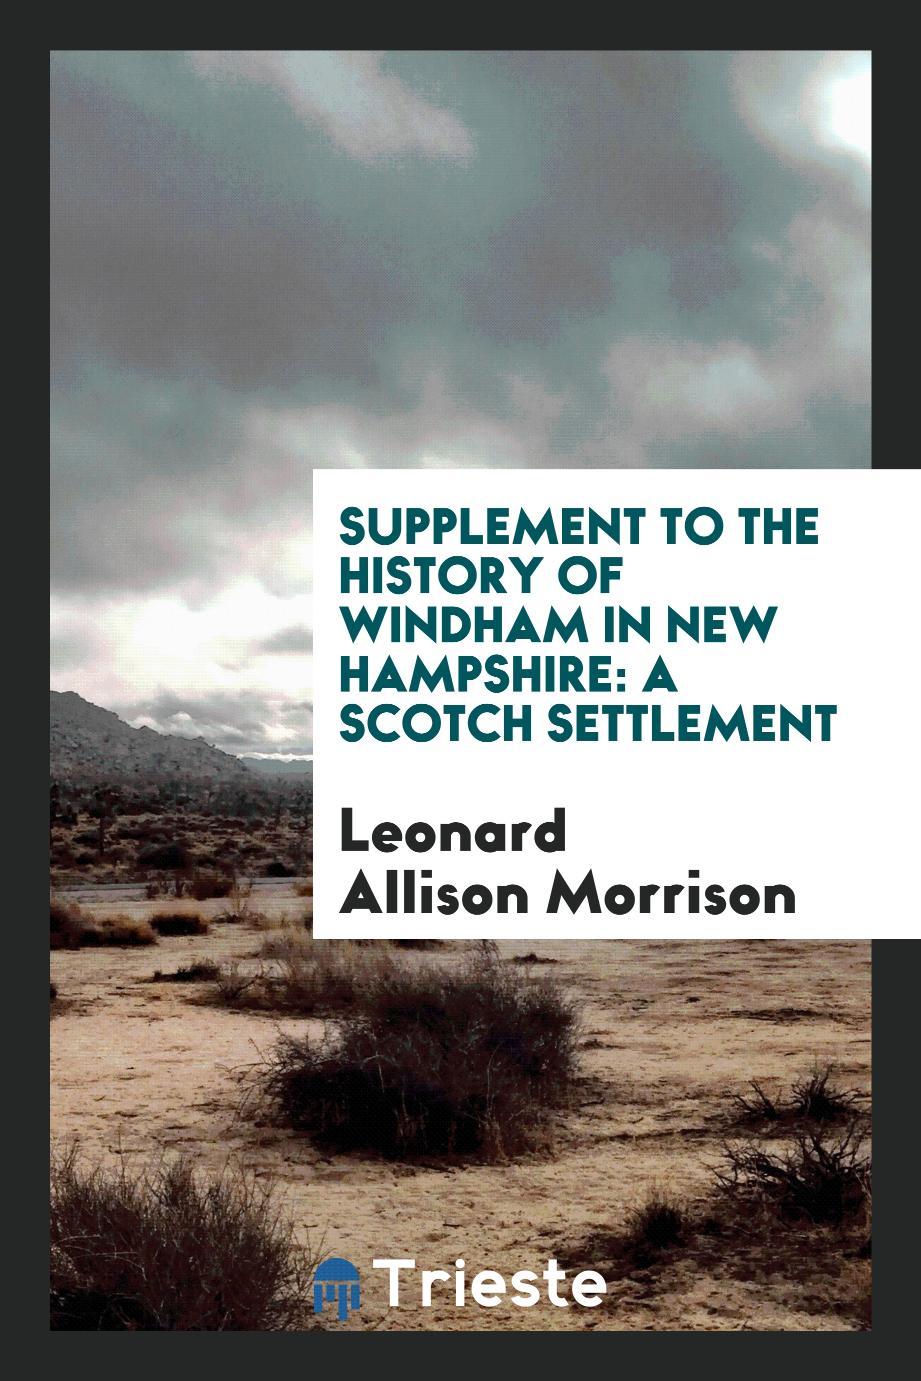 Supplement to The History of Windham in New Hampshire: A Scotch Settlement